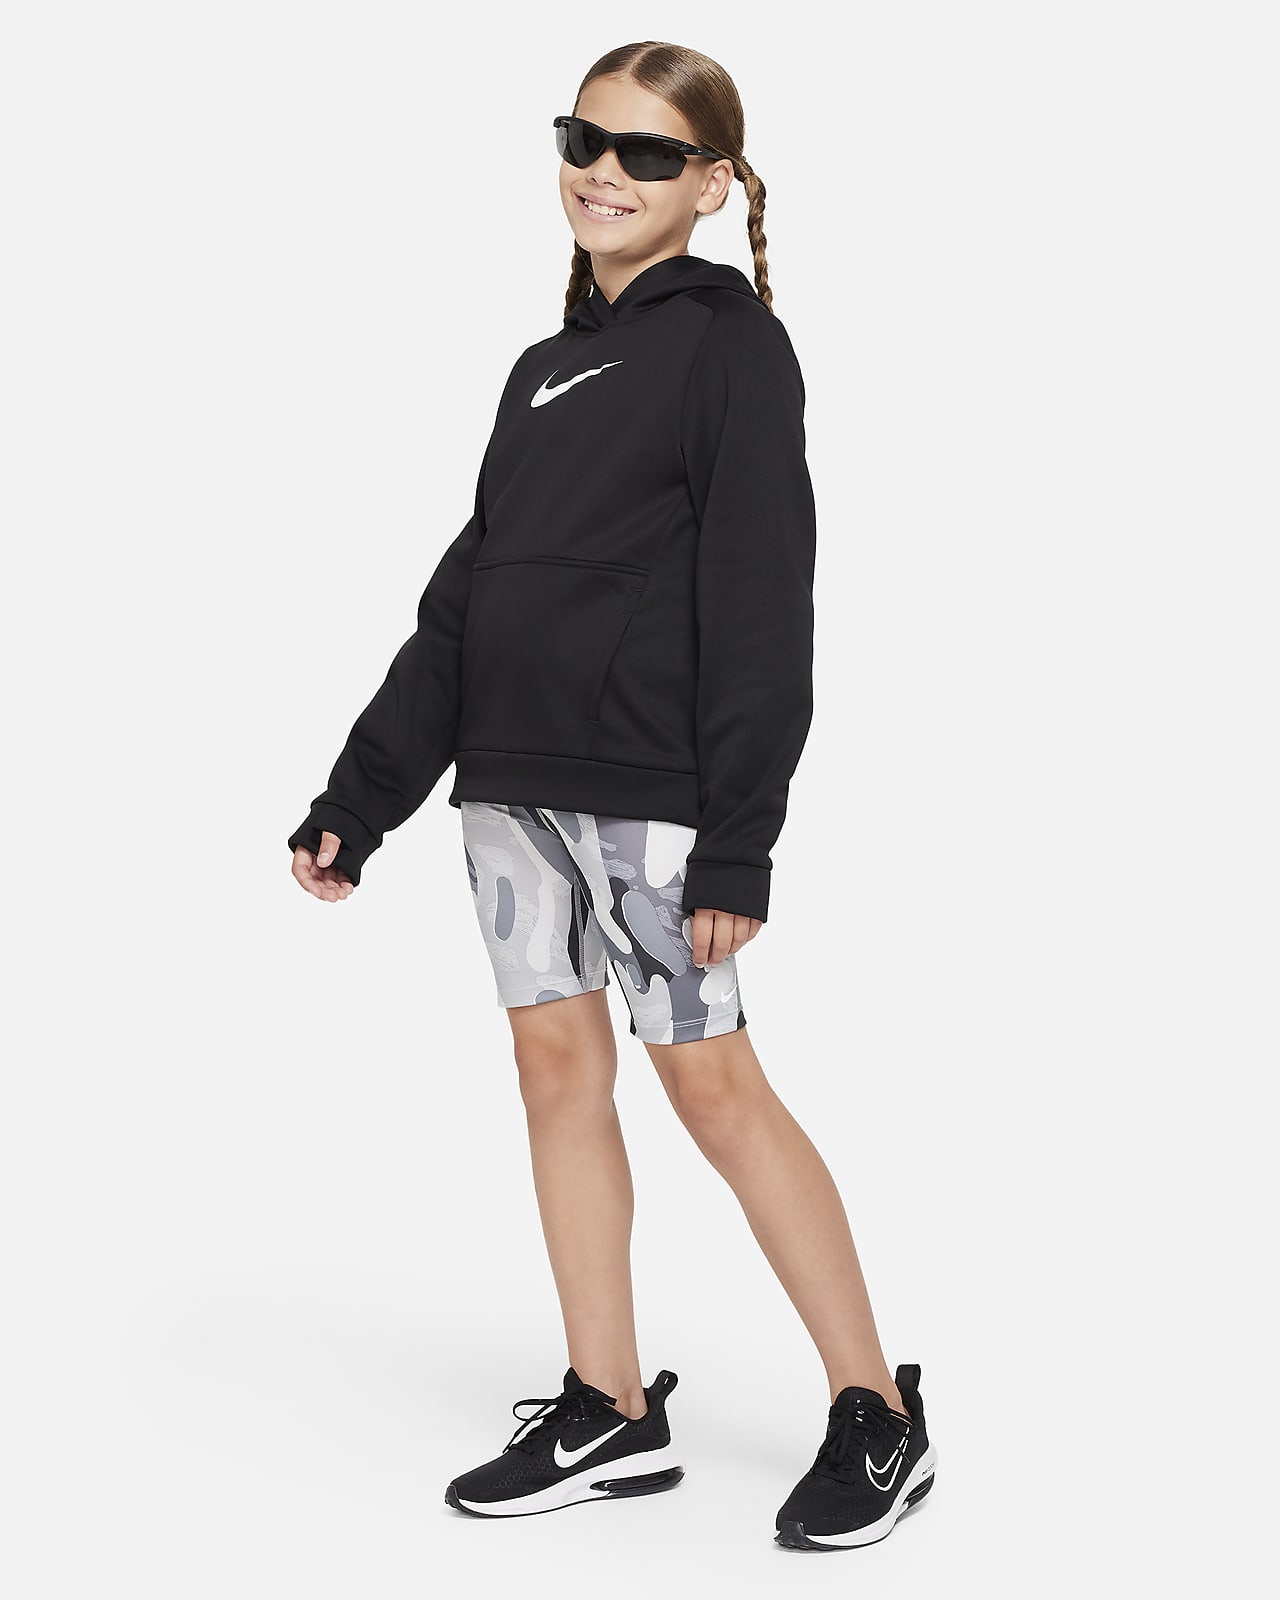 Girls Nike Shorts: Stay Active In Kids Nike Shorts